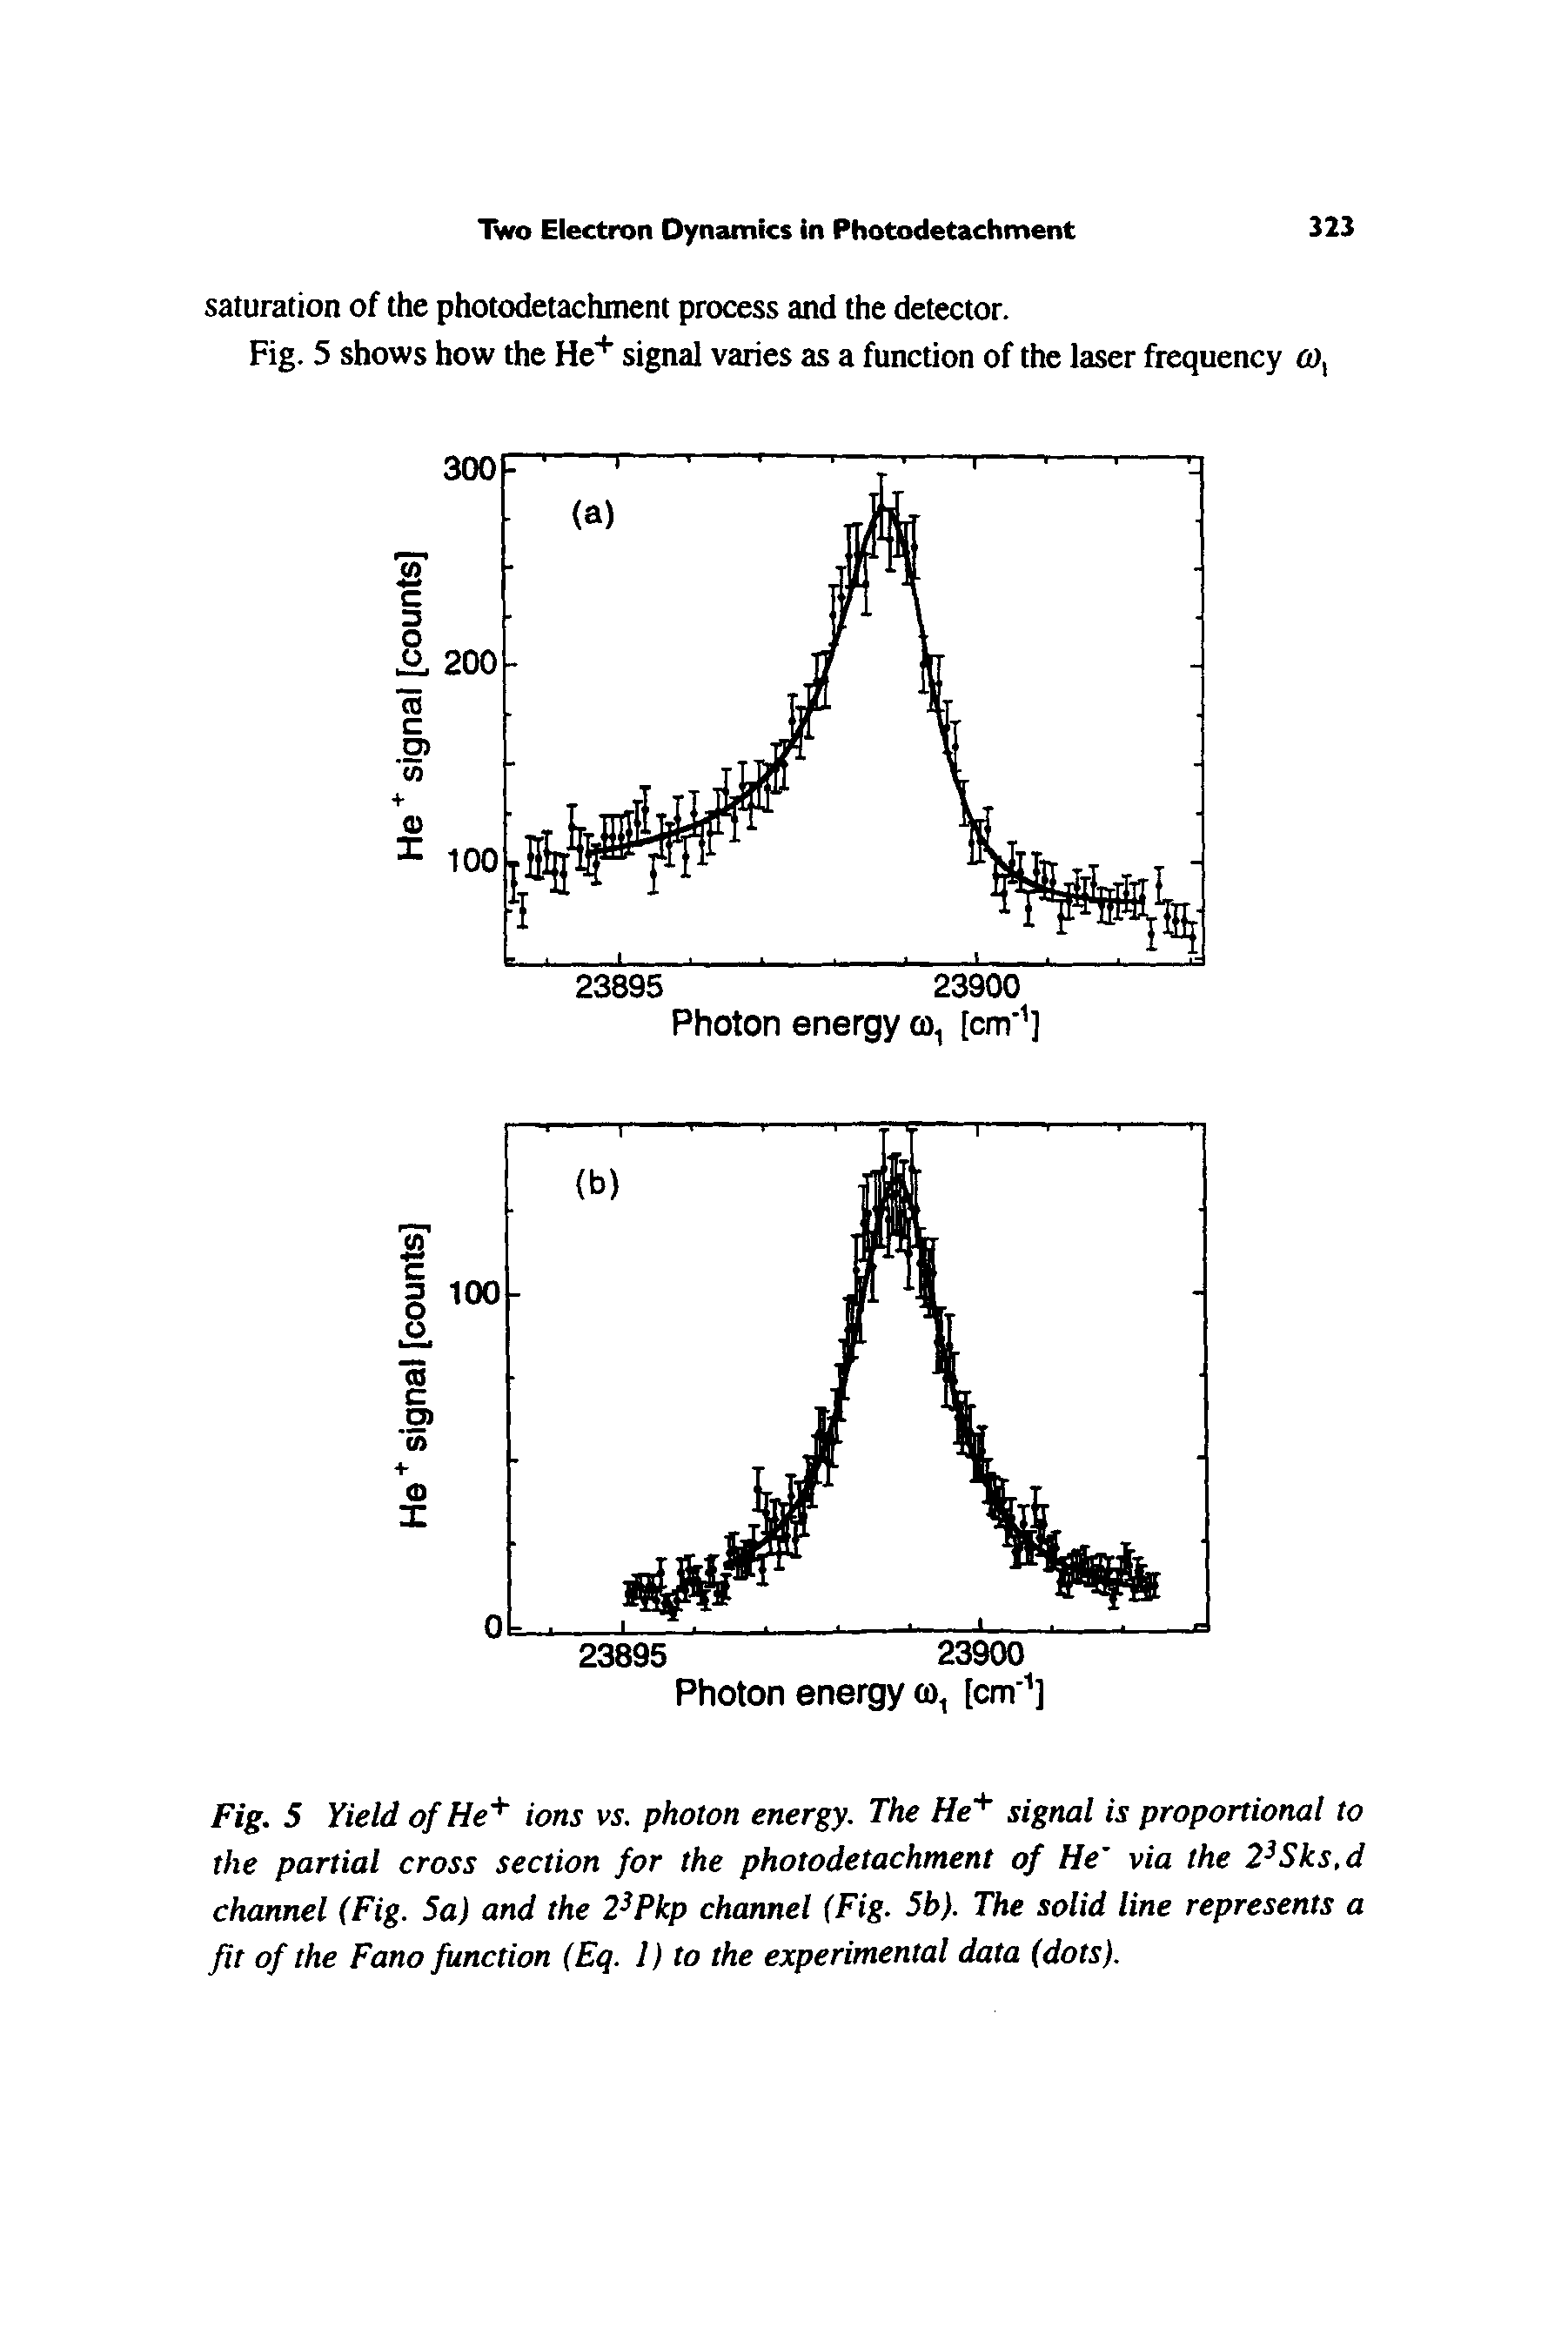 Fig. 5 Yield of He ions vs. photon energy. The He" signal is proportional to the partial cross section for the photodetachment of He via the 2 Sks,d channel (Fig. 5a) and the 2 Pkp channel (Fig. 5b). The solid line represents a fit of the Fano function (Eq. 1) to the experimental data (dots).